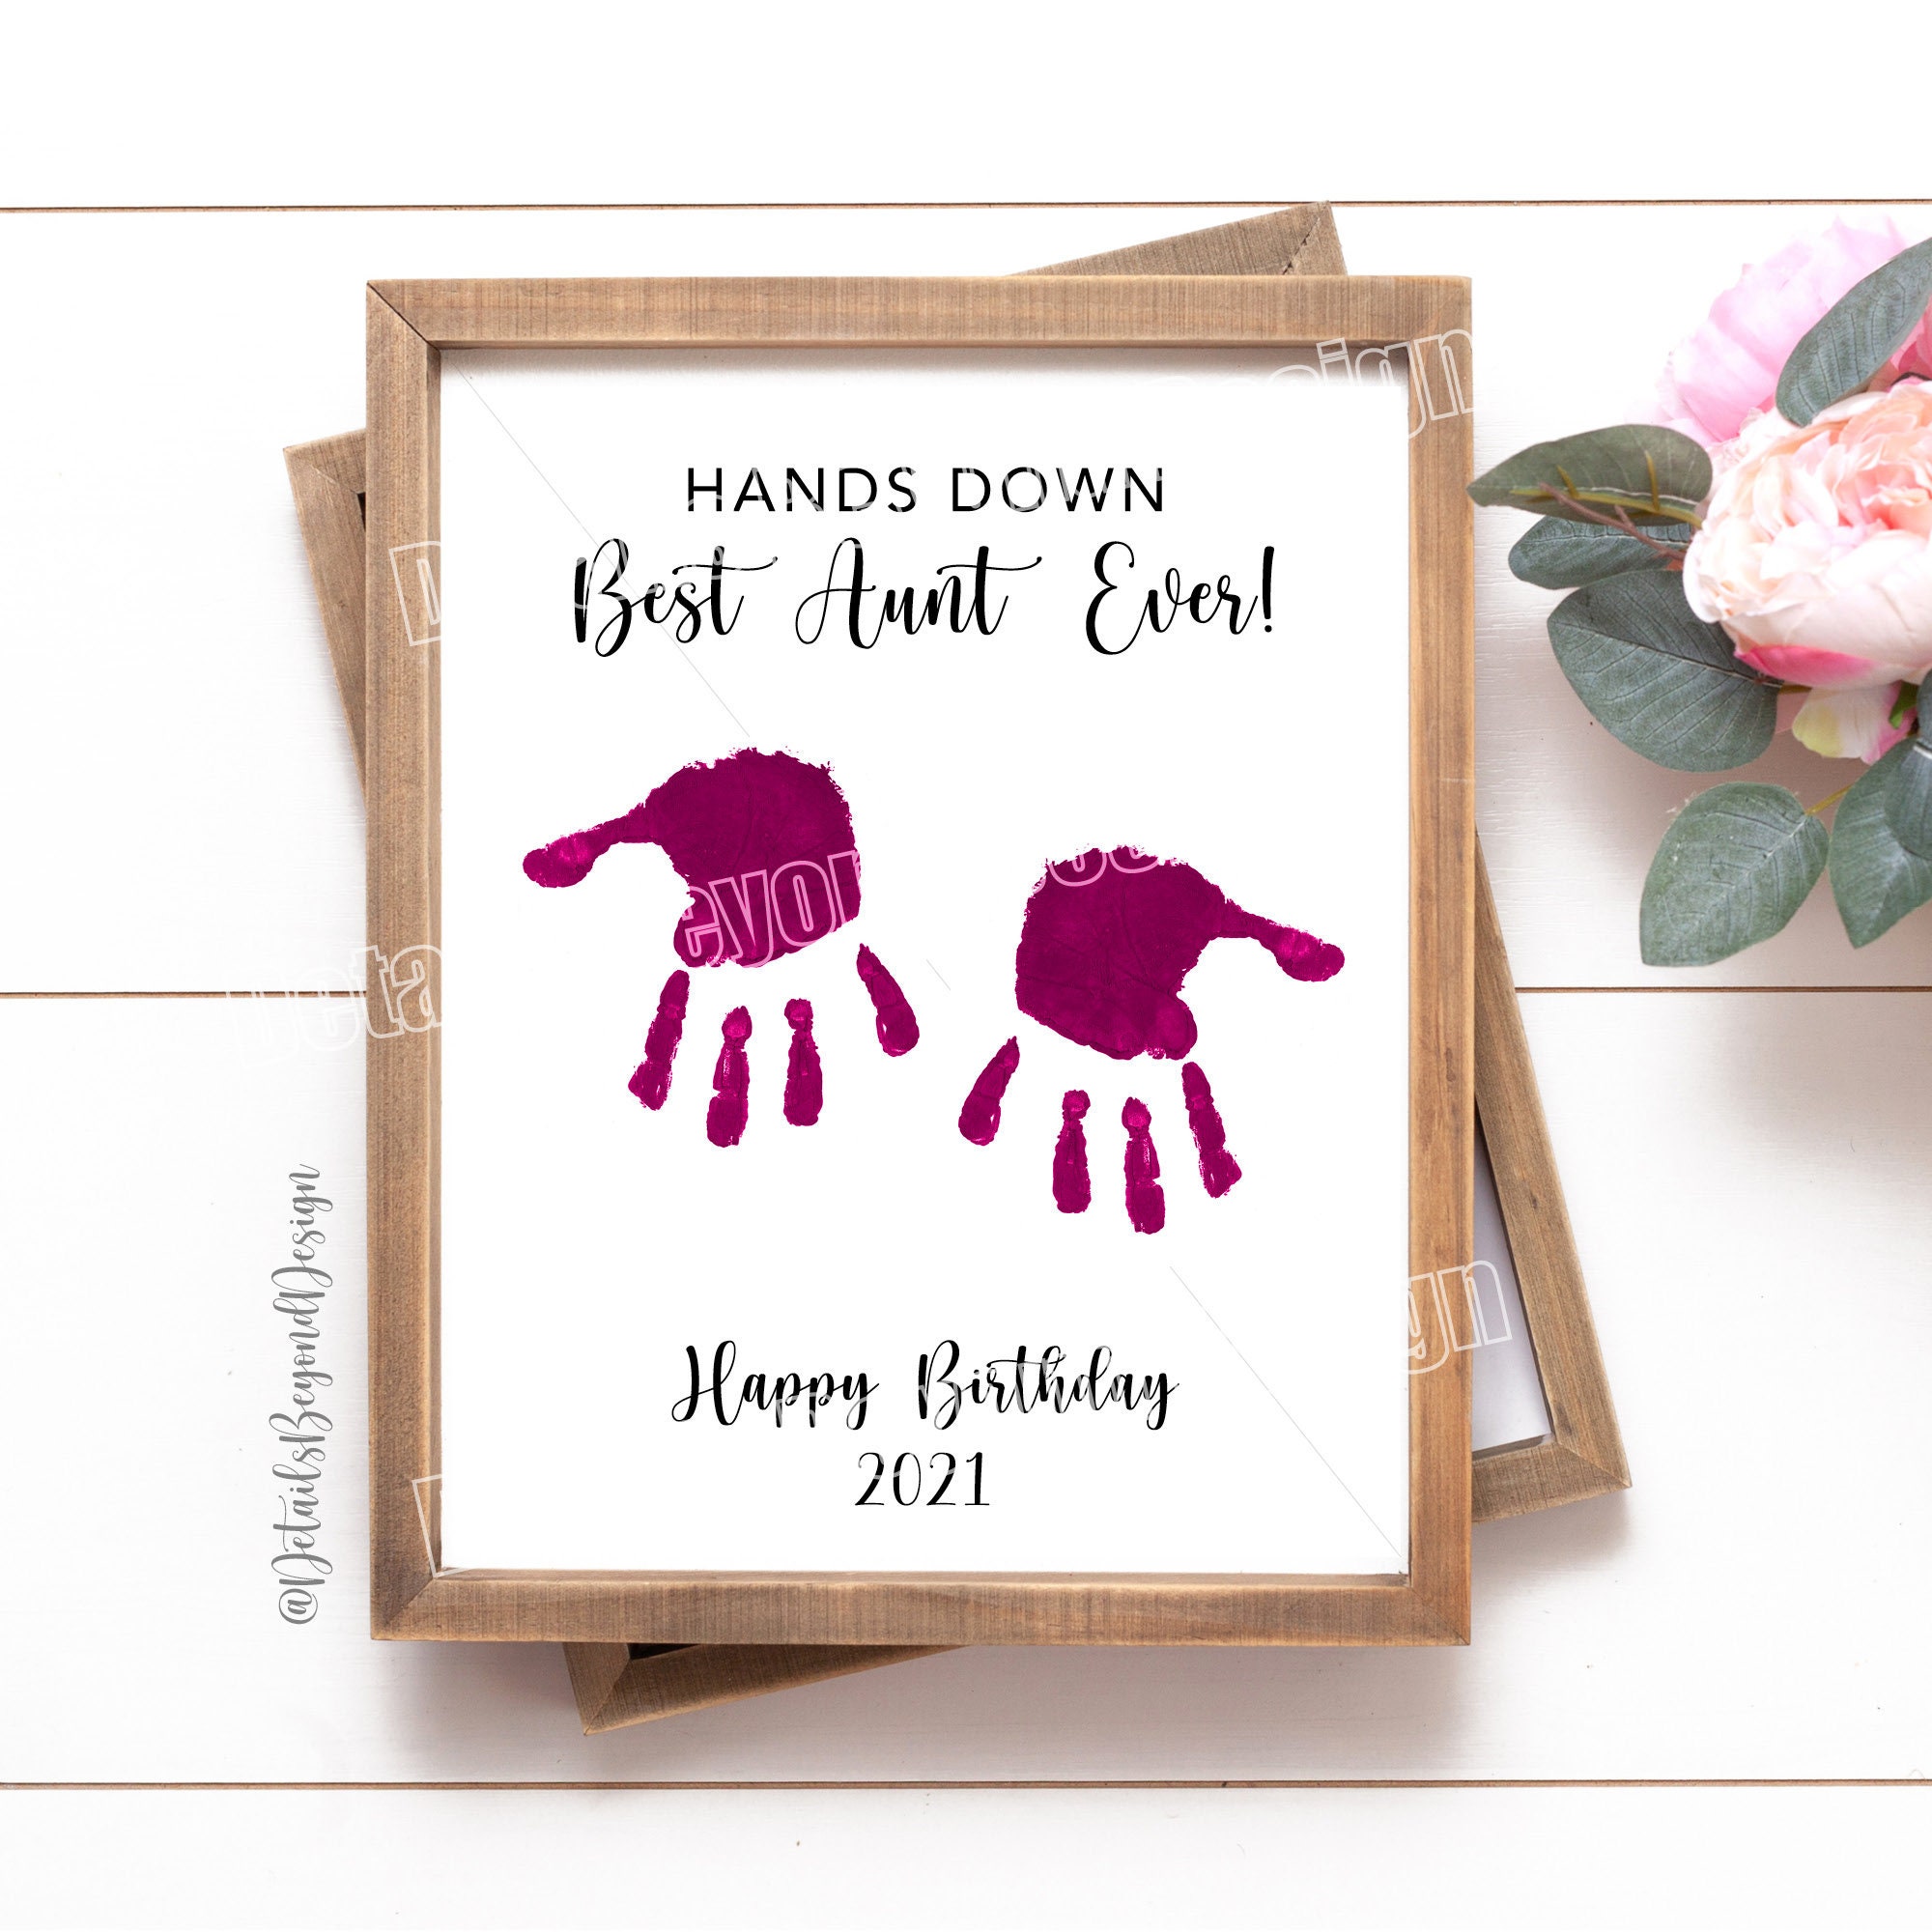 hands-down-best-aunt-ever-8x10-printable-etsy